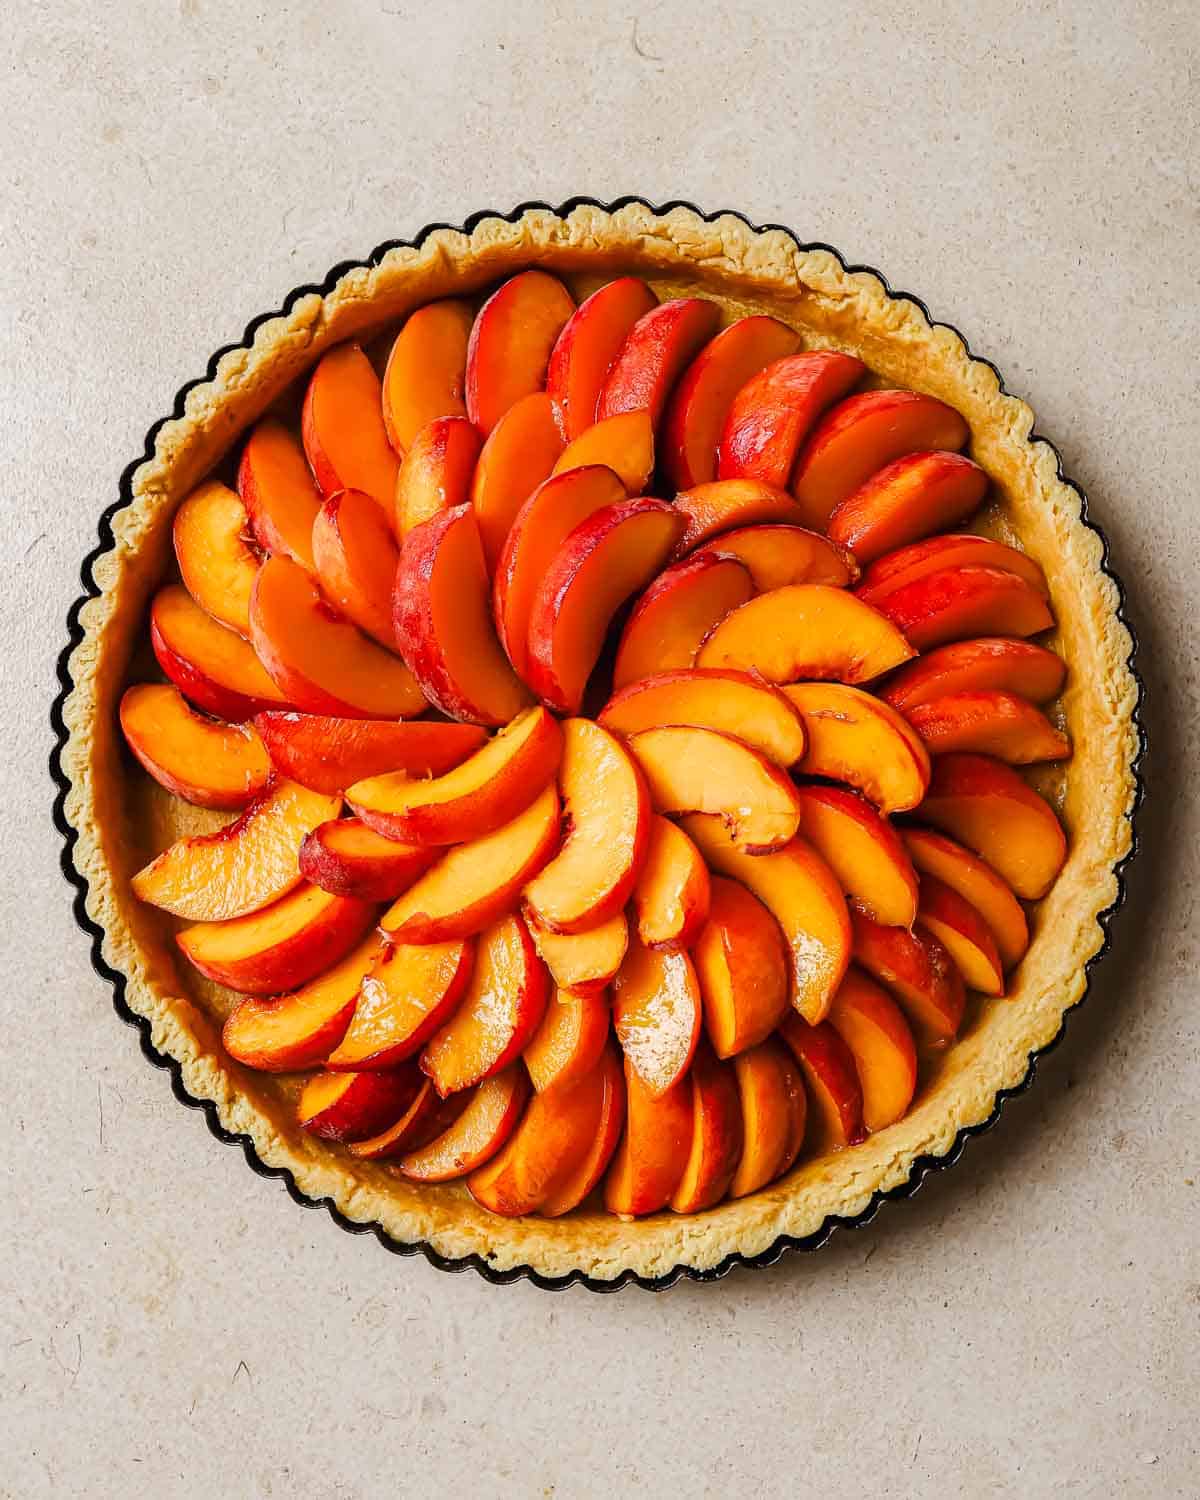 Tart crust with sliced peaches arranged in a circular pattern inside it.